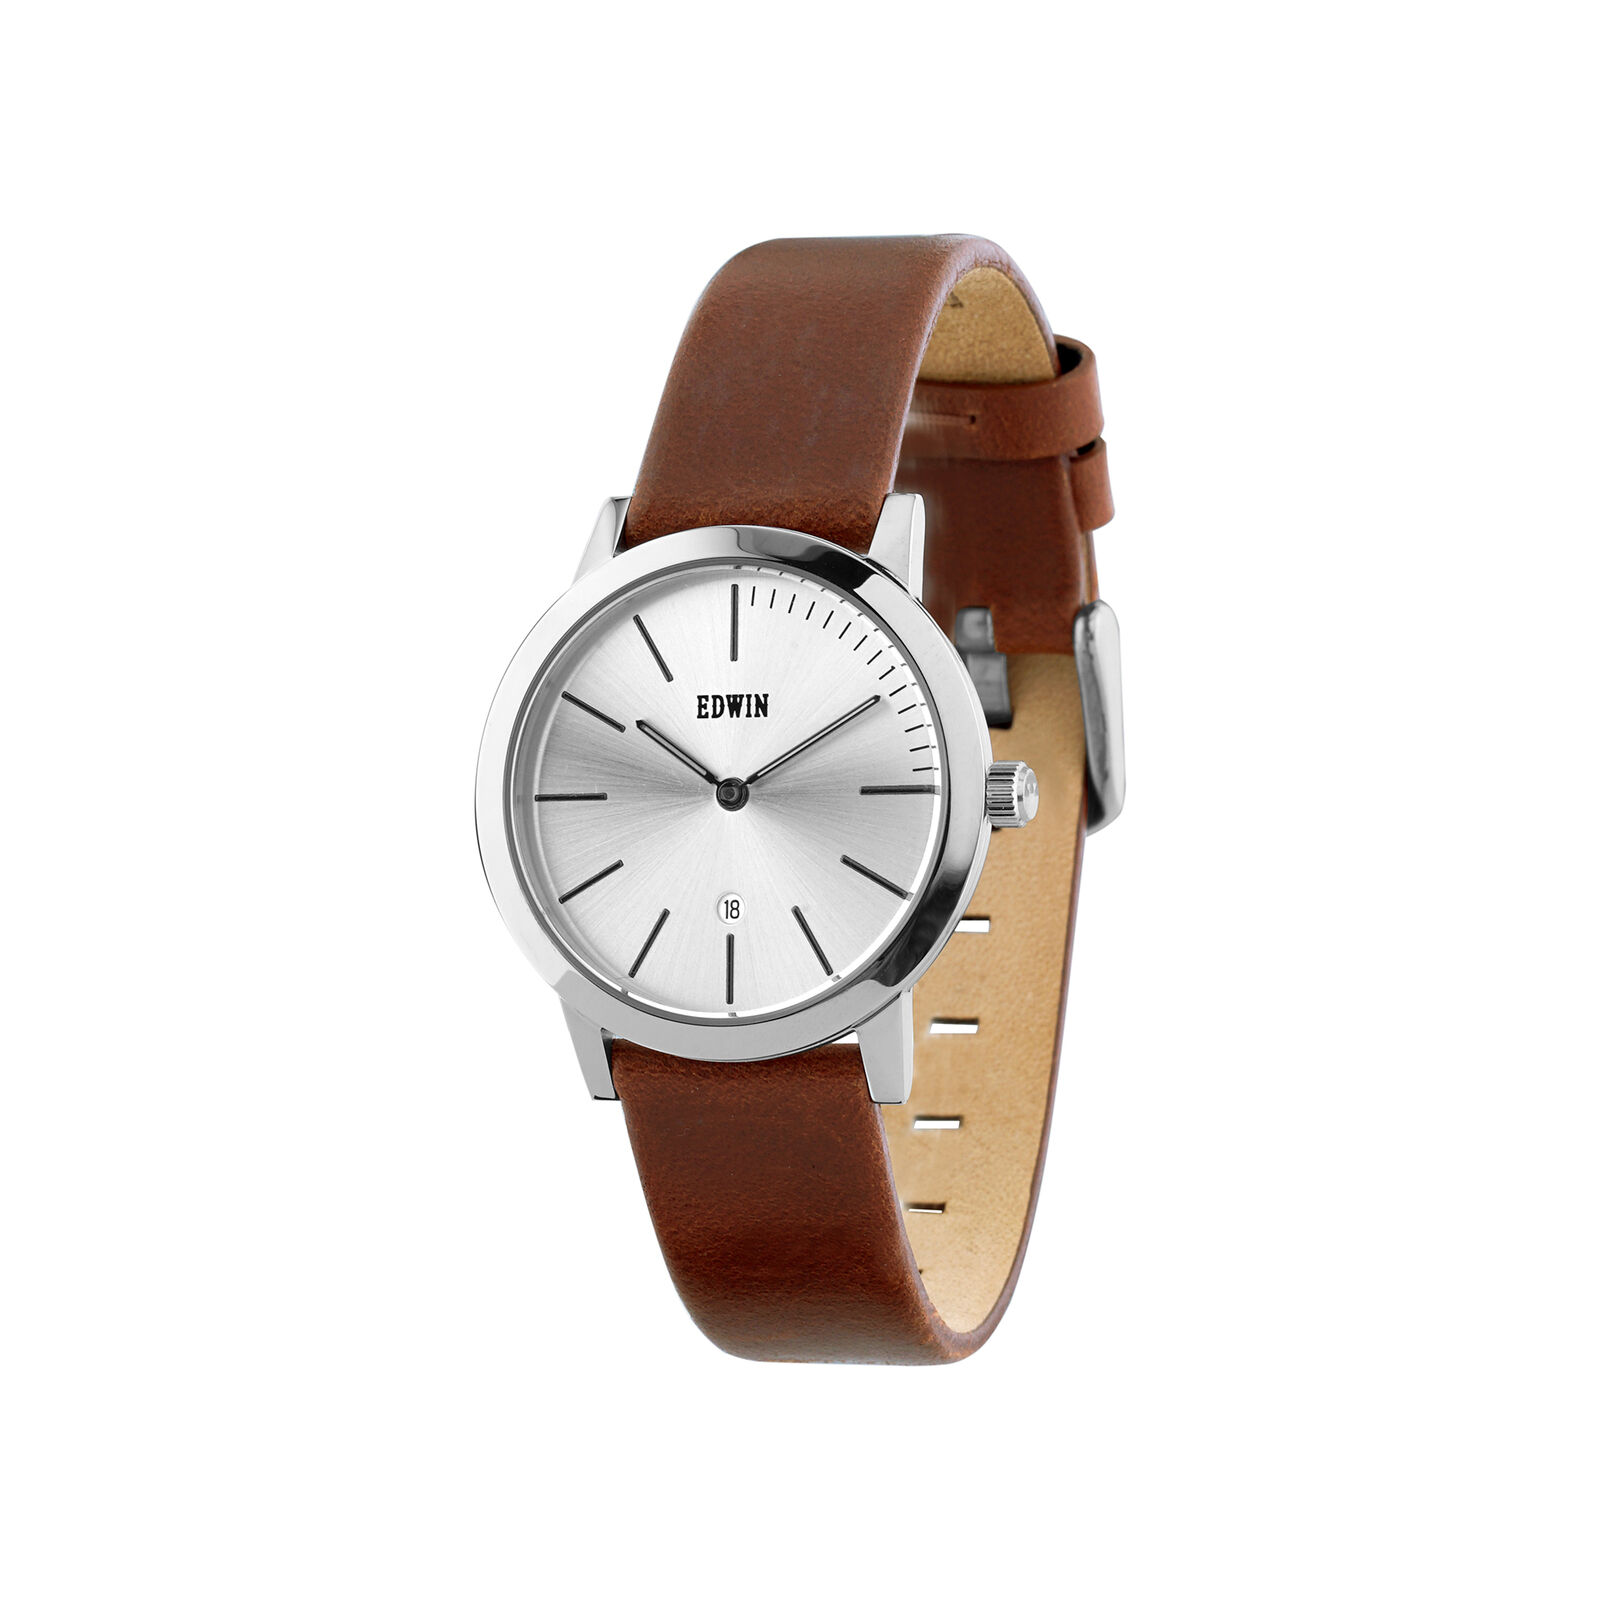 Edwin KENNY Women's 2 Hand-Date Watch, Stainless Steel Case, Brown Leather Band